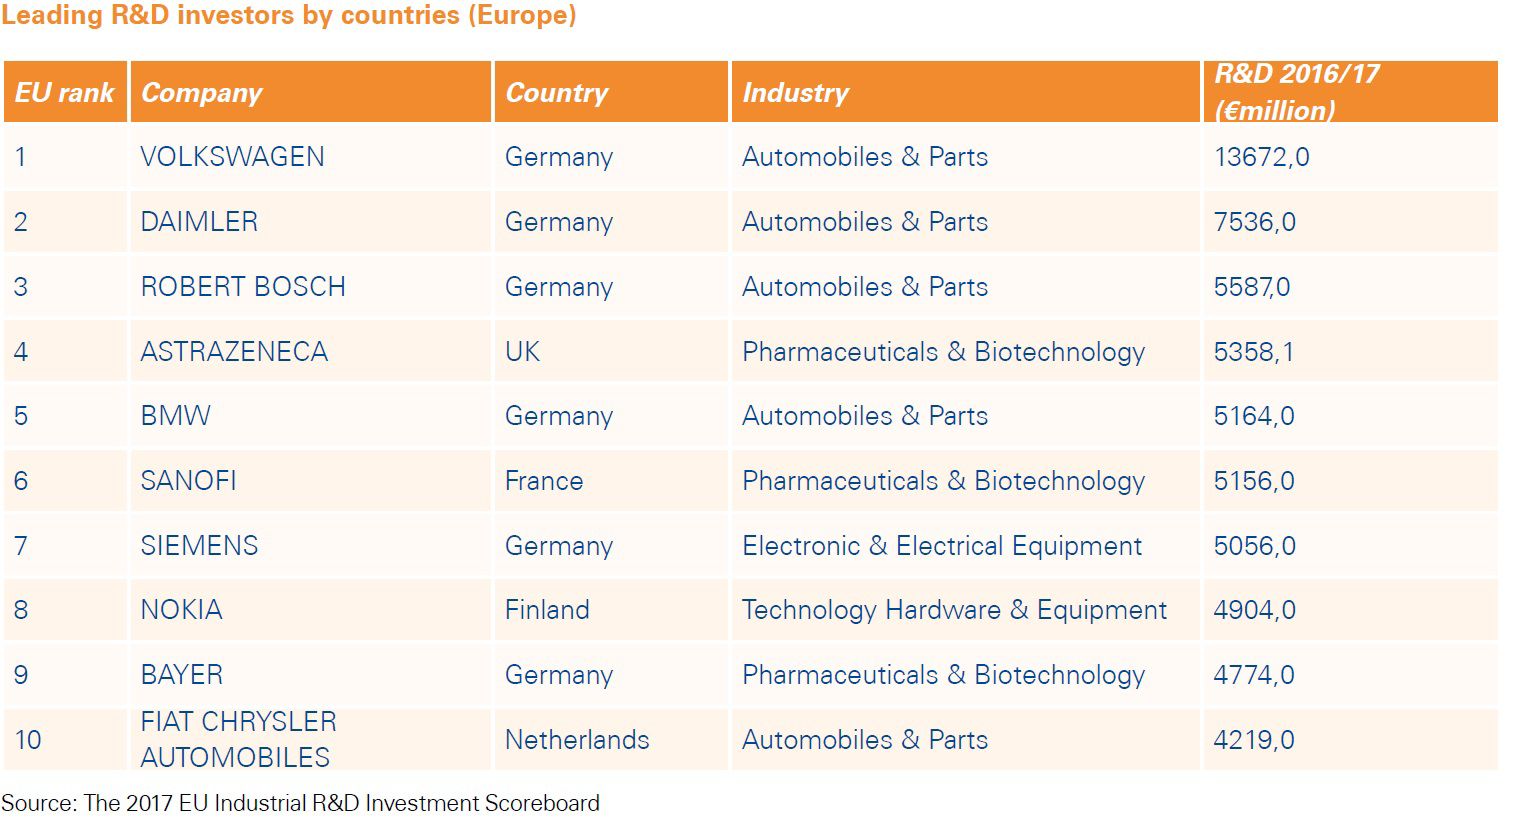 Table with Leading R&D Investors by countries (Europe)